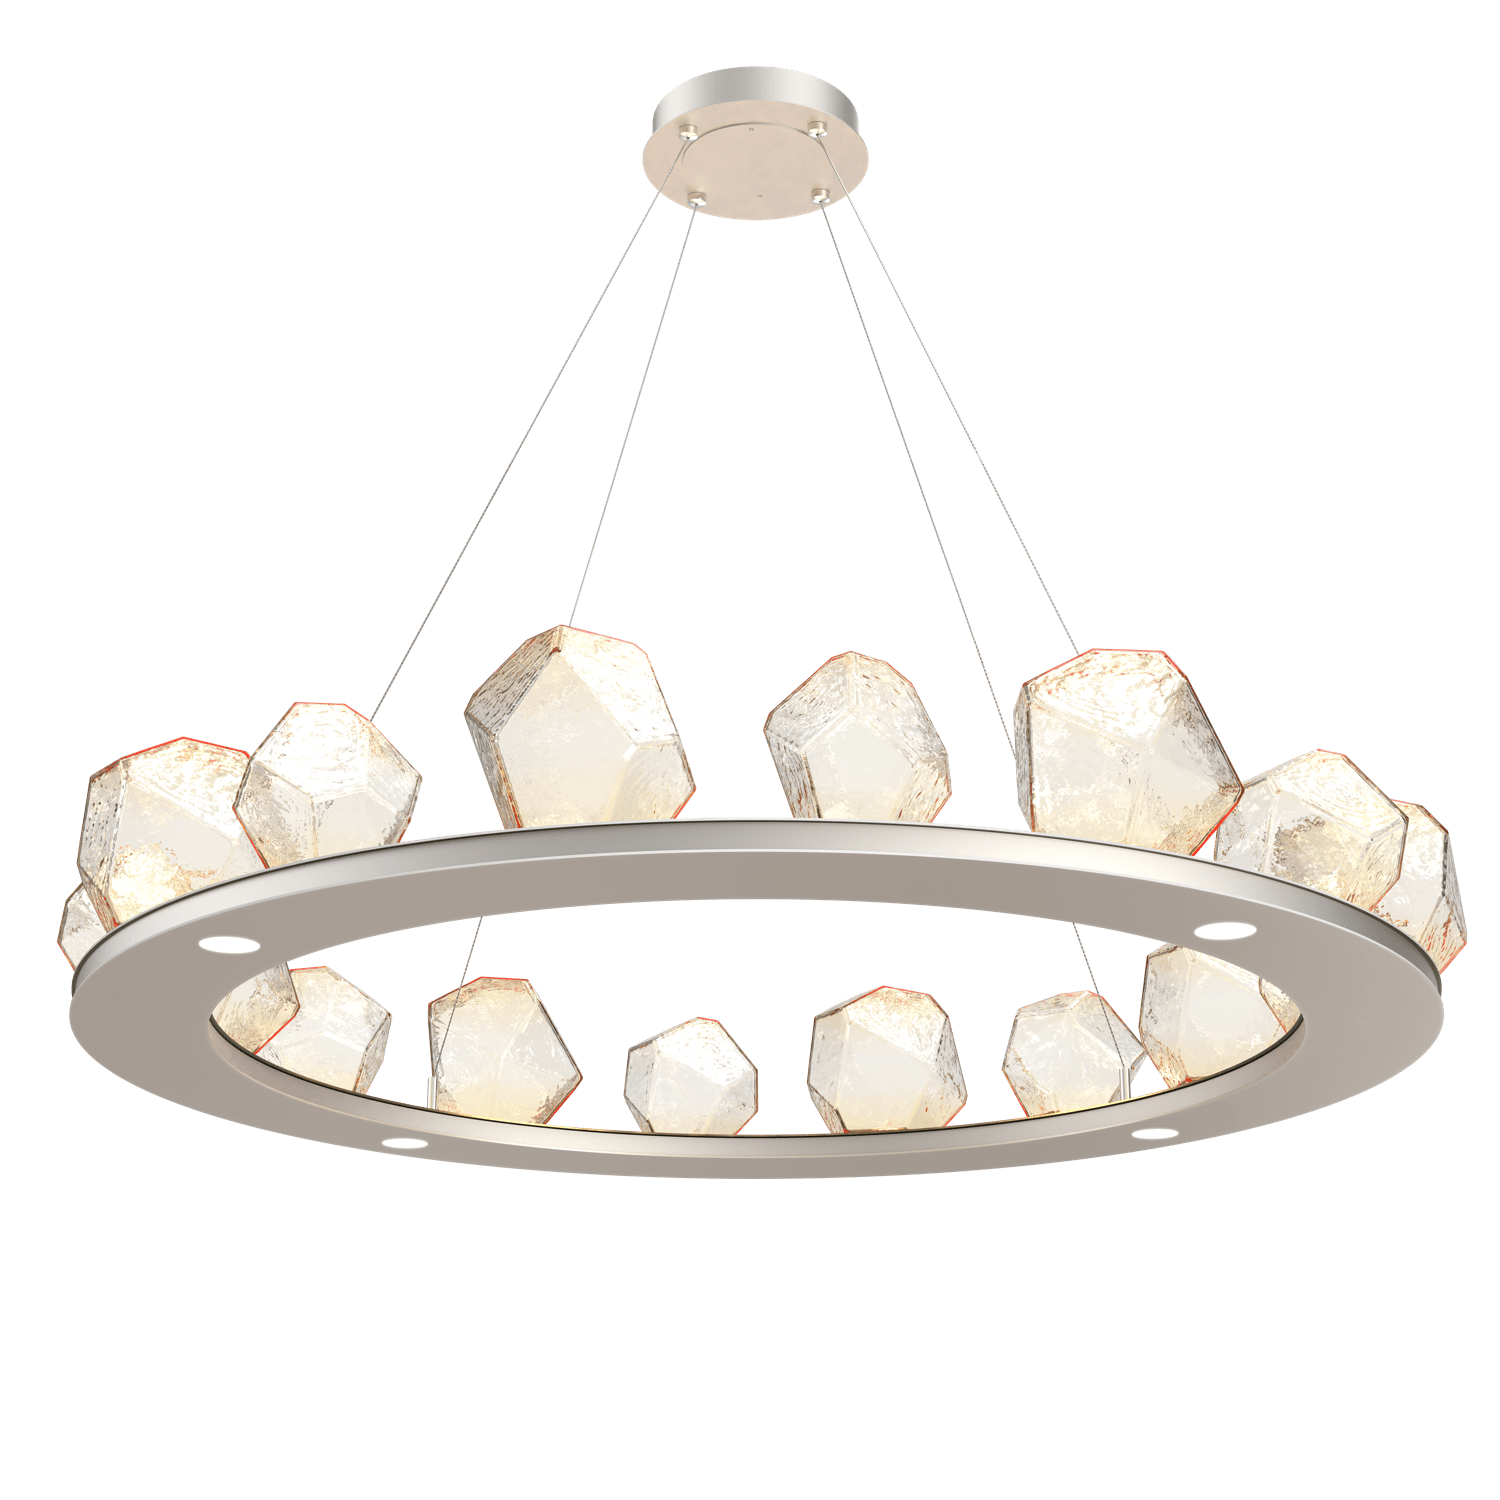 CHB0039-0D-BS-A-Hammerton-Studio-Gem-48-inch-ring-chandelier-with-metallic-beige-silver-finish-and-amber-blown-glass-shades-and-LED-lamping